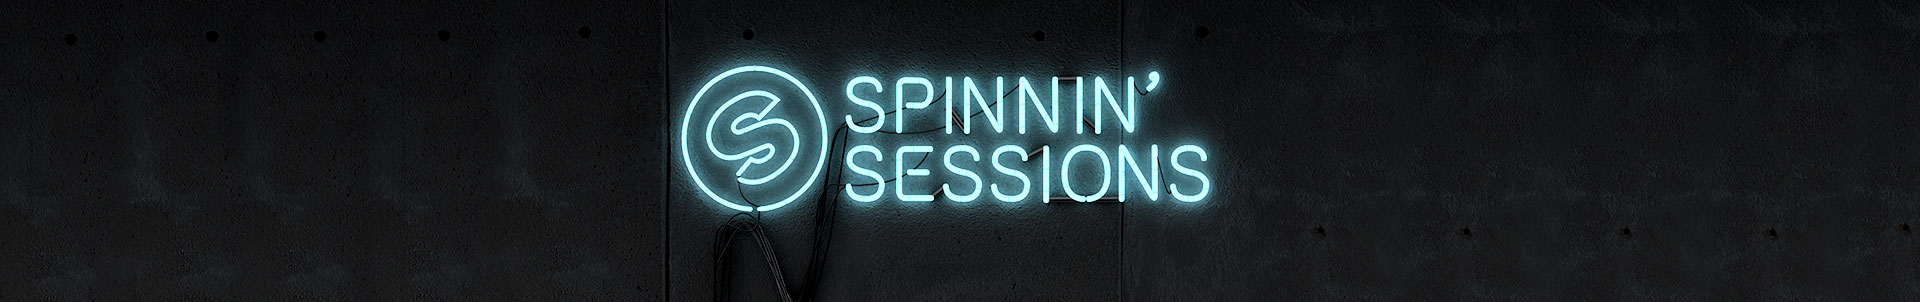 We Rave You premiere: Spinnin' Sessions with a Guest Mix by Bassjackers and Lucas & Steve